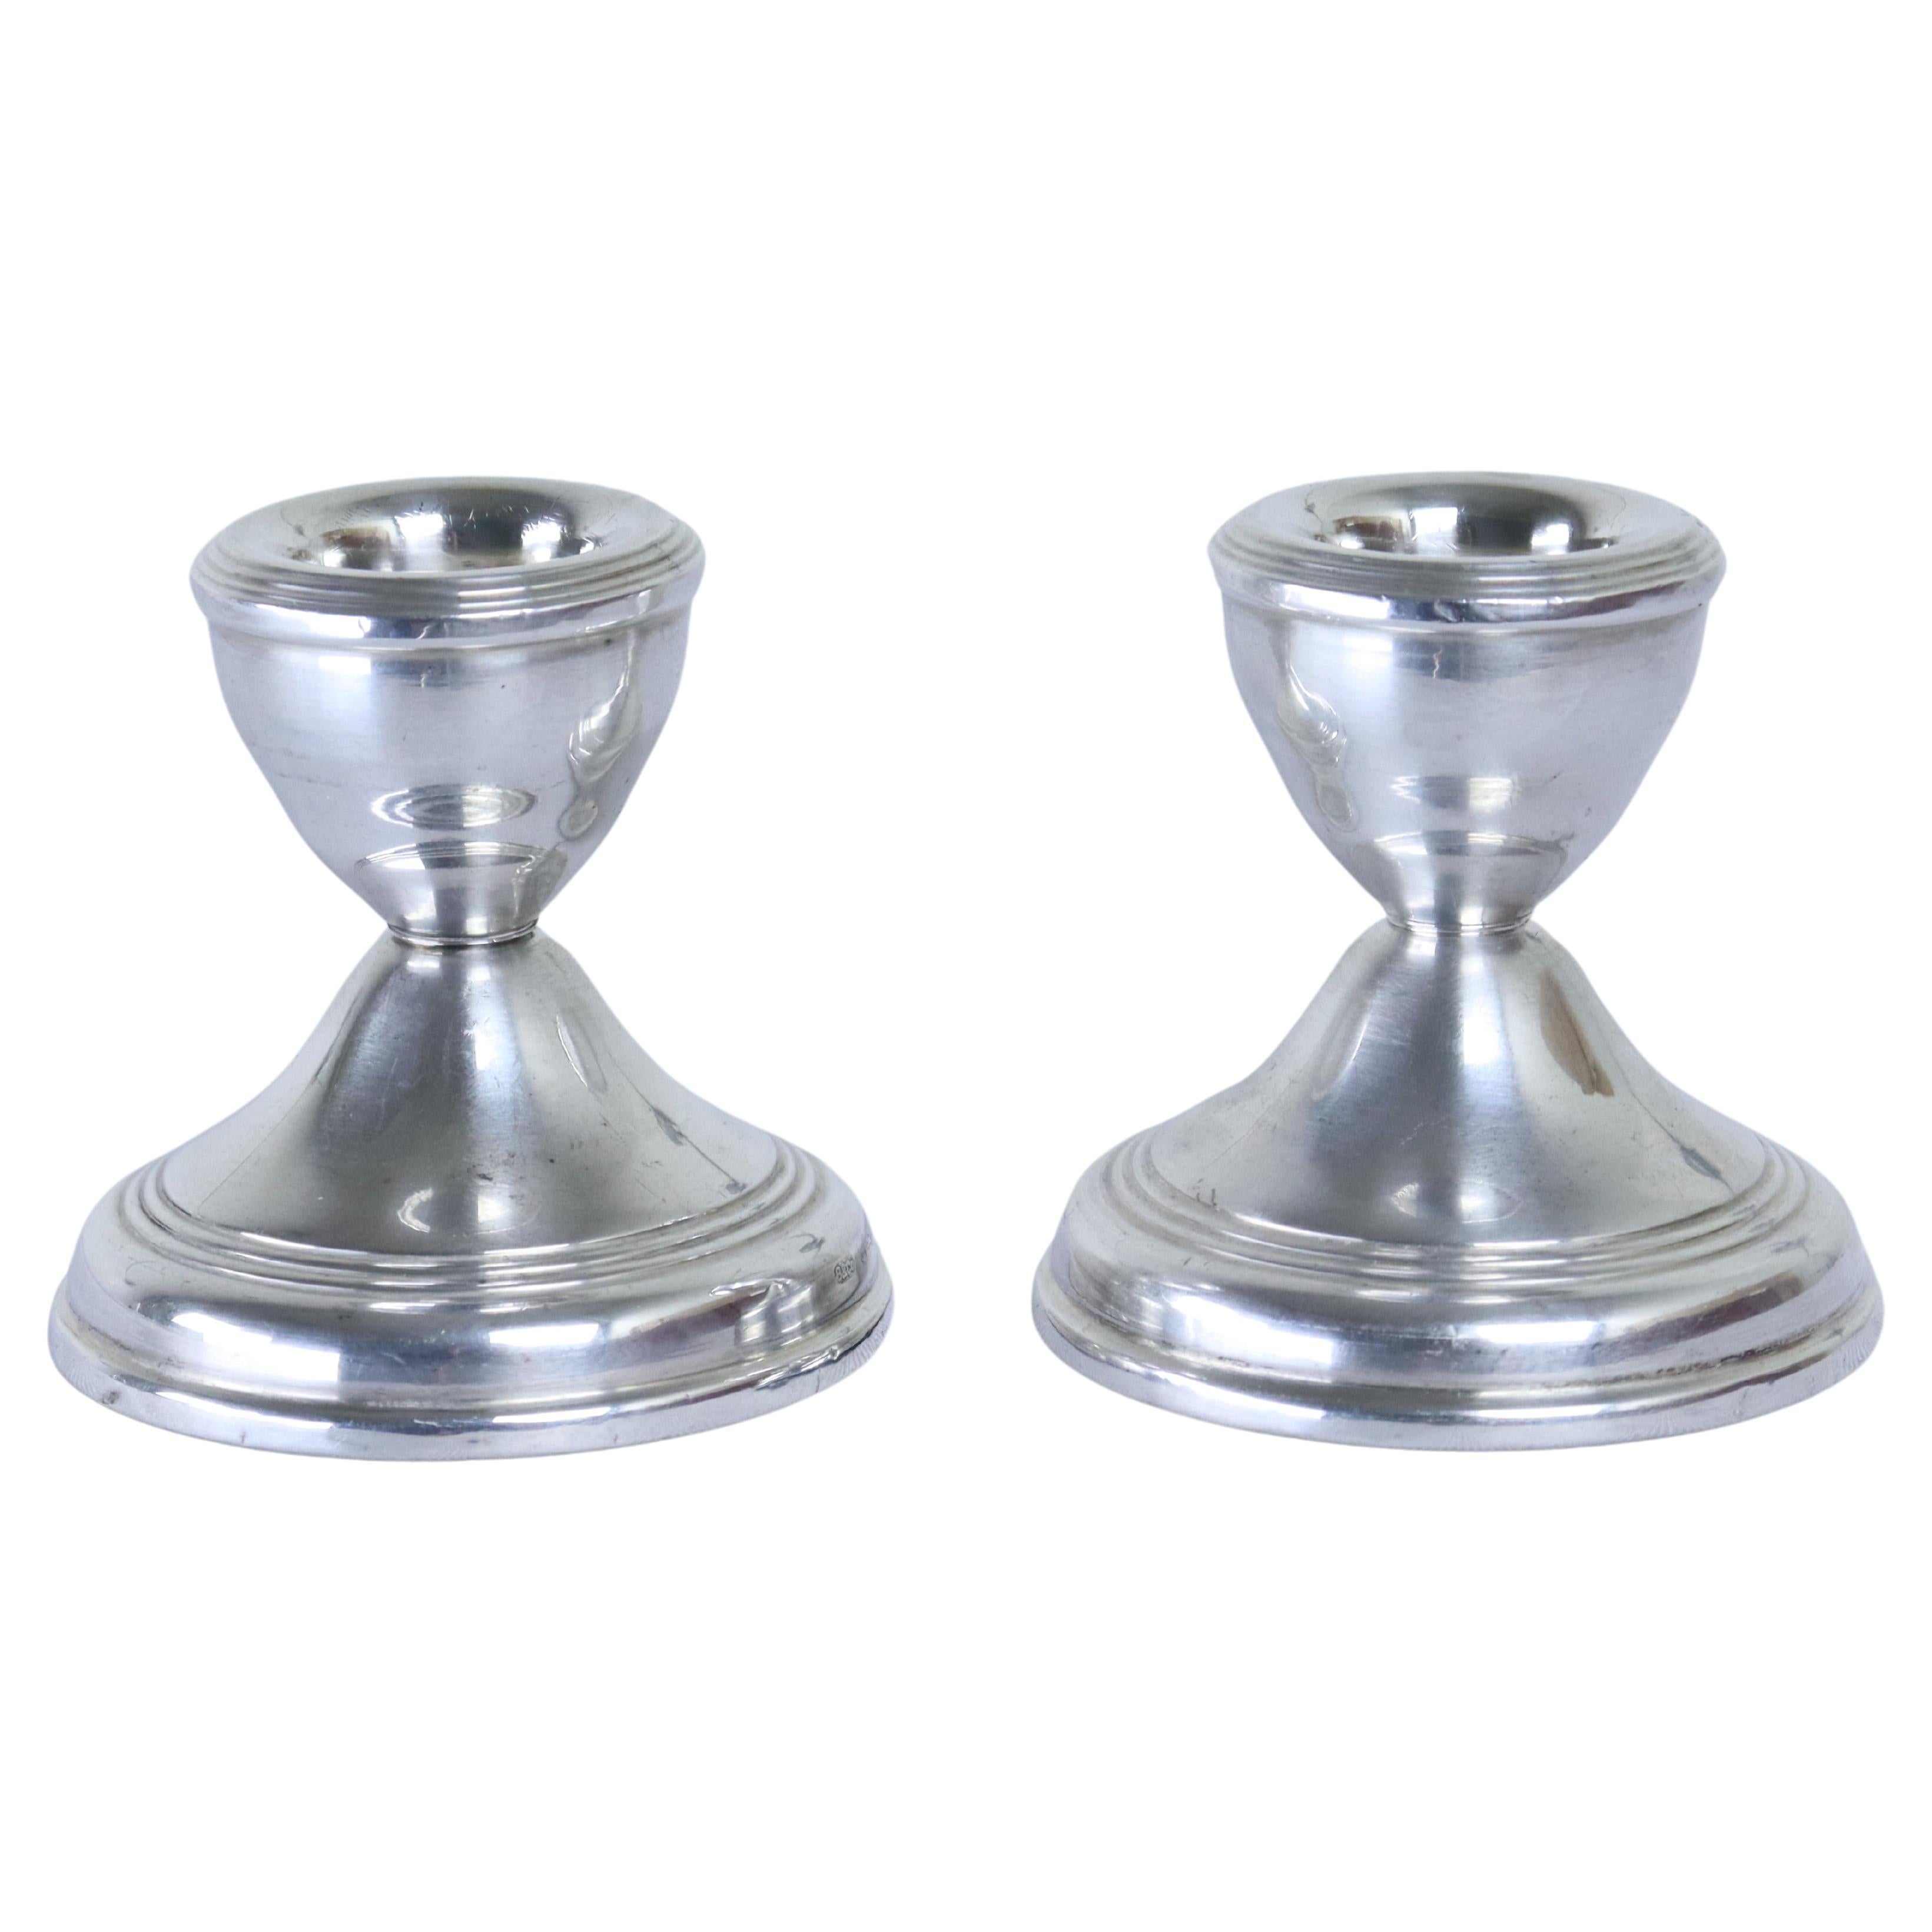 Pair of Hallmarked Sterling Silver Candlesticks by Broadway & Co., Birmingham